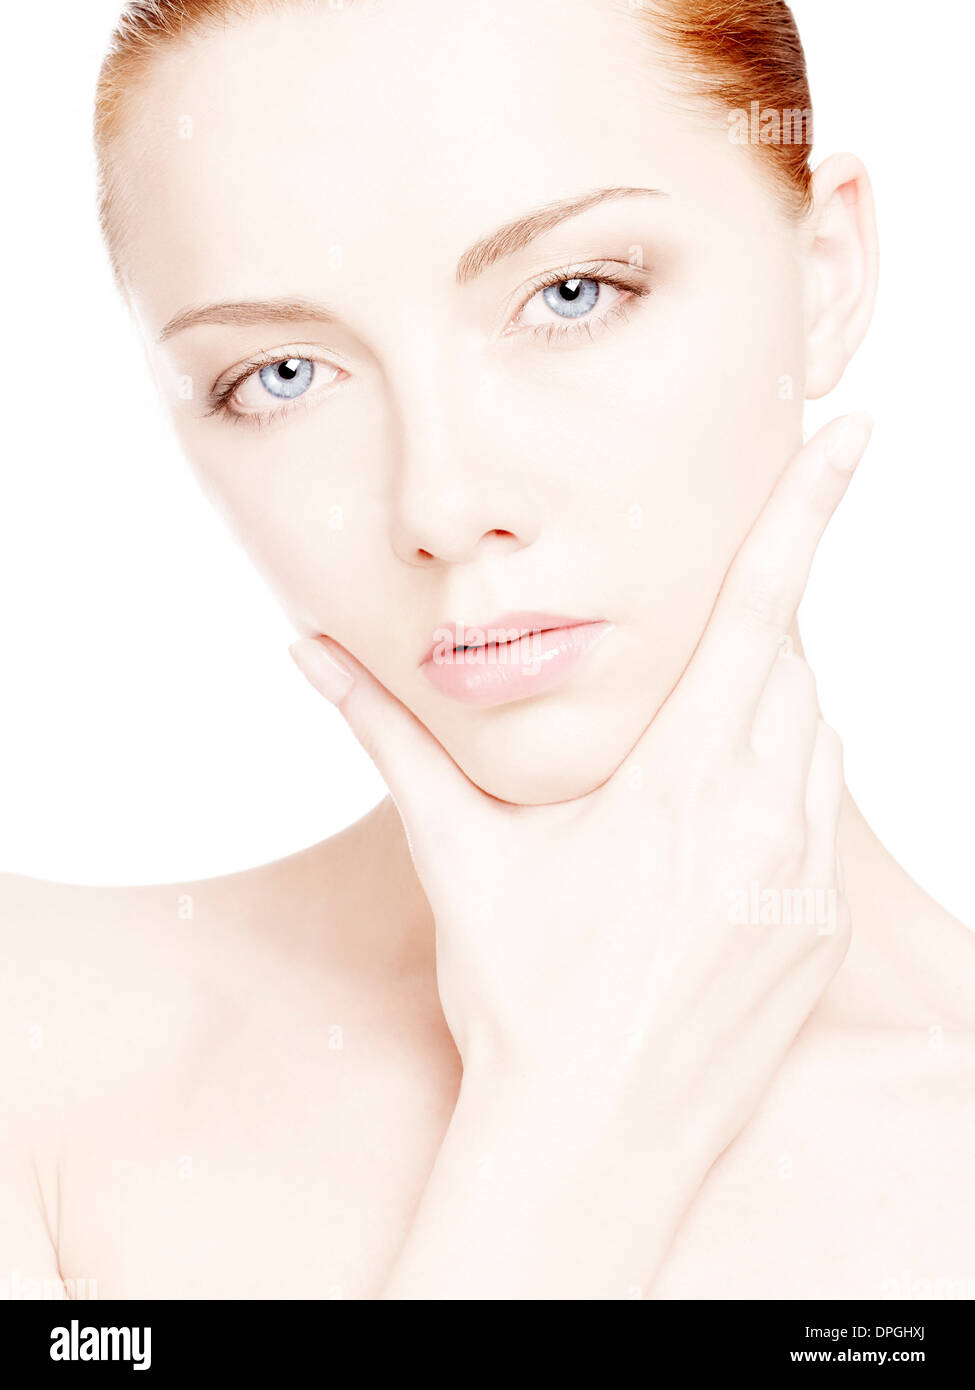 Clean beauty Stock Photo